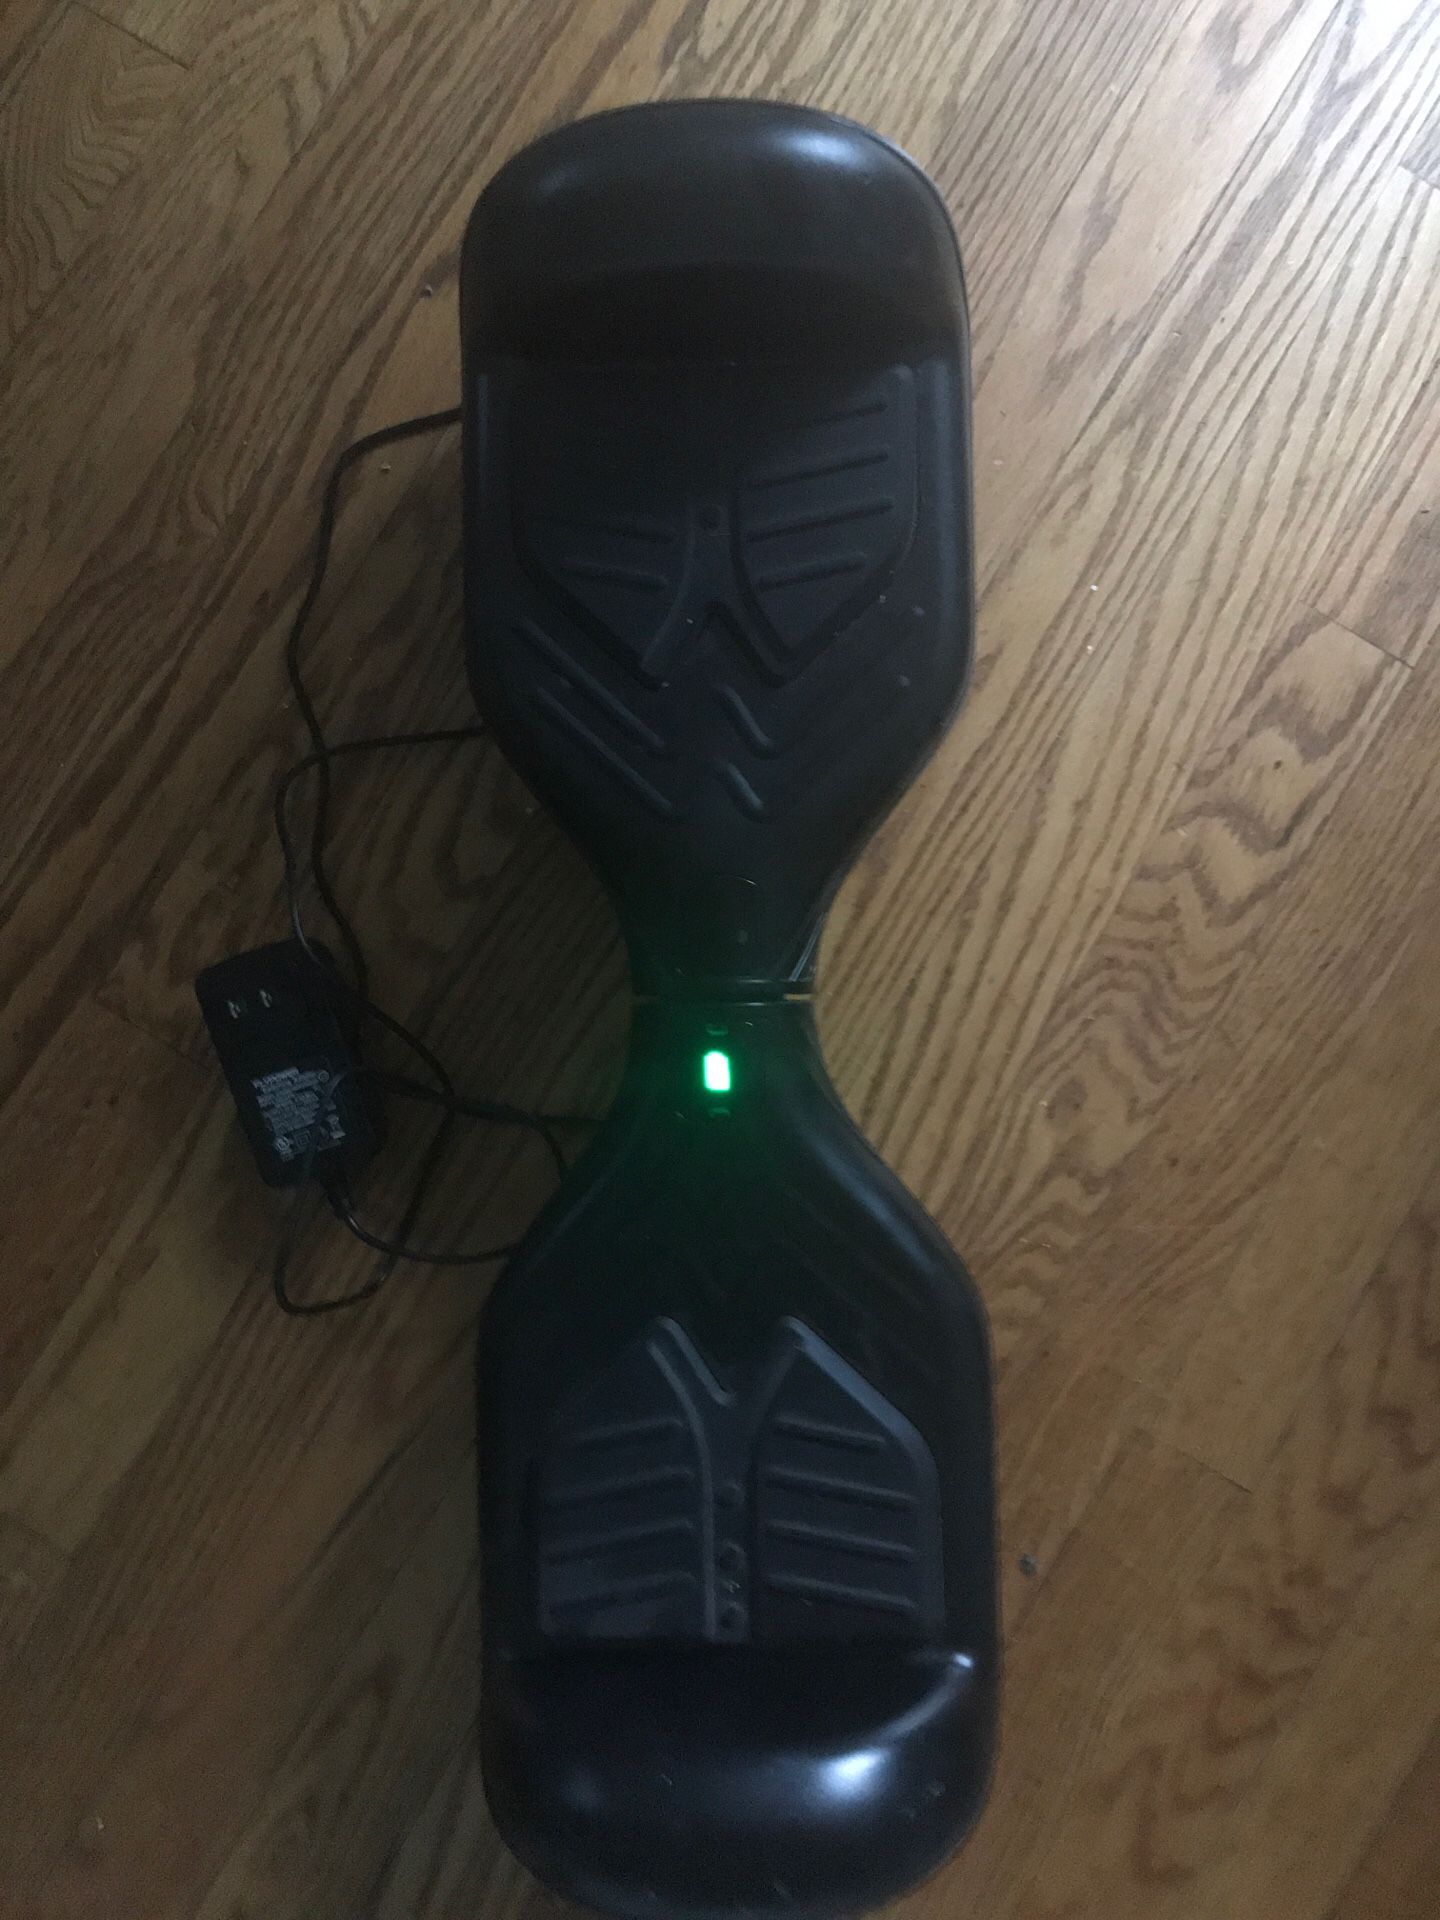 NEWEST VERSION-Swagtron-Hoverboard-90$ today